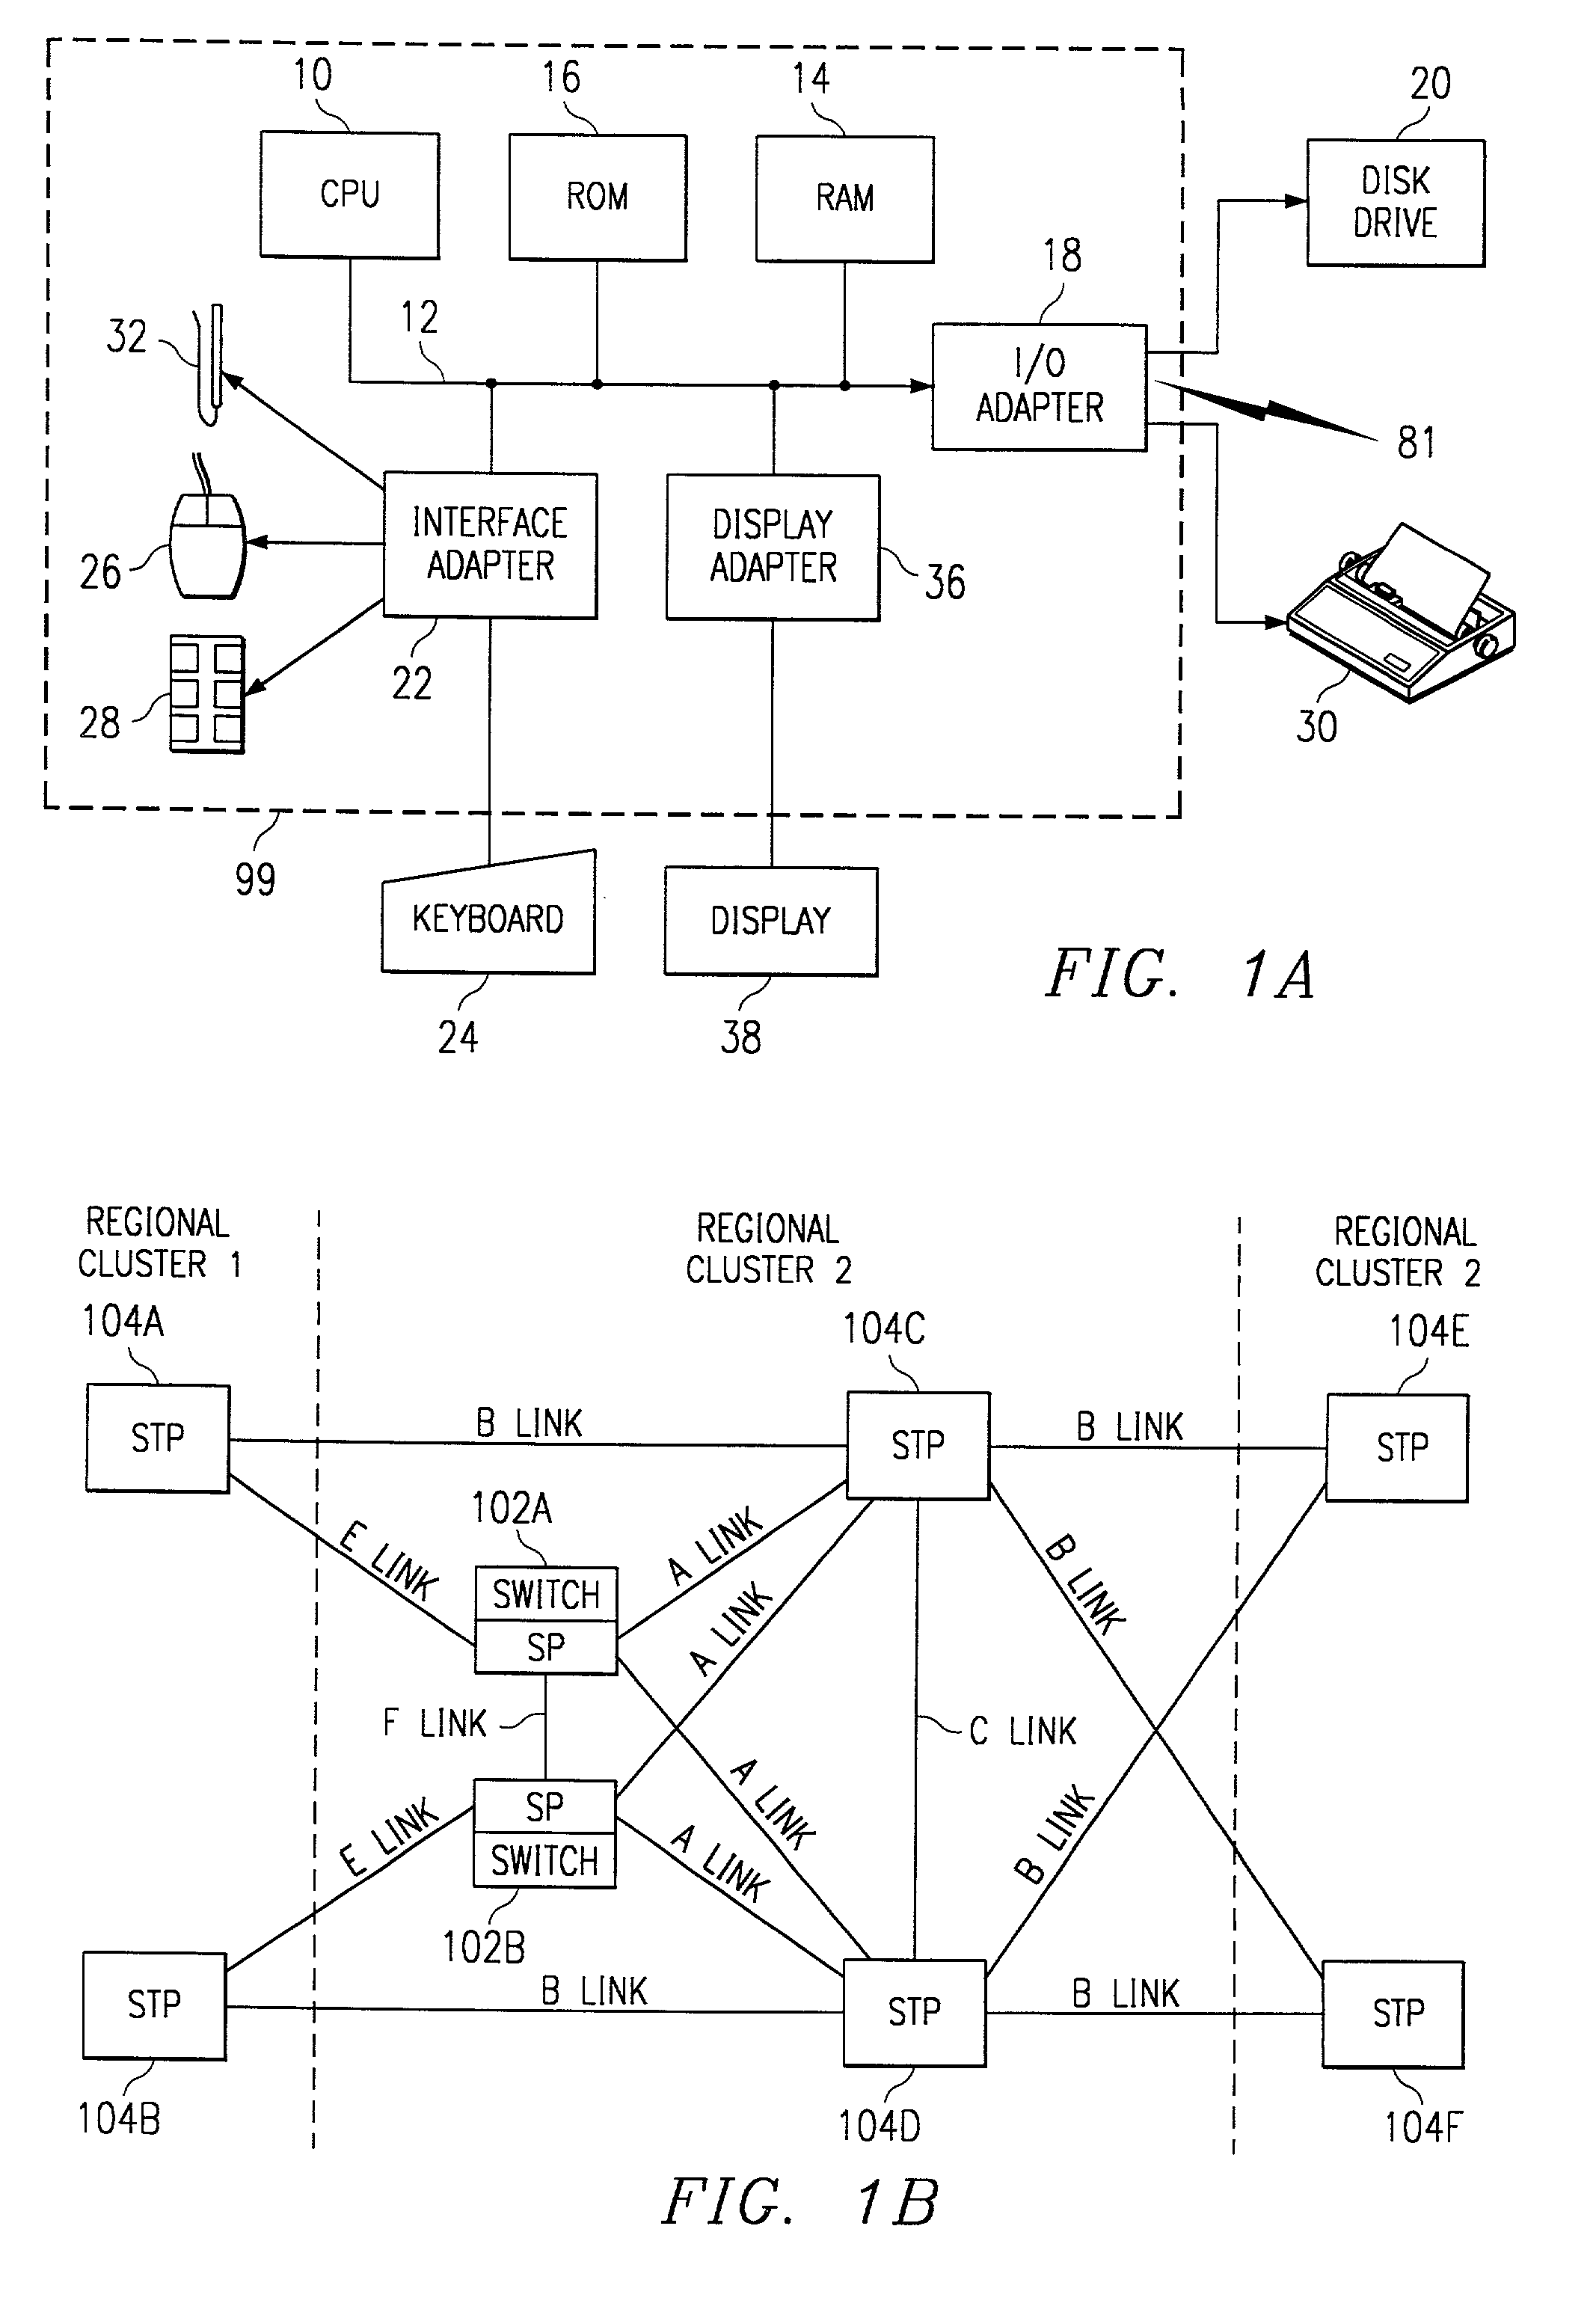 System and method for providing requested quality of service in a hybrid network